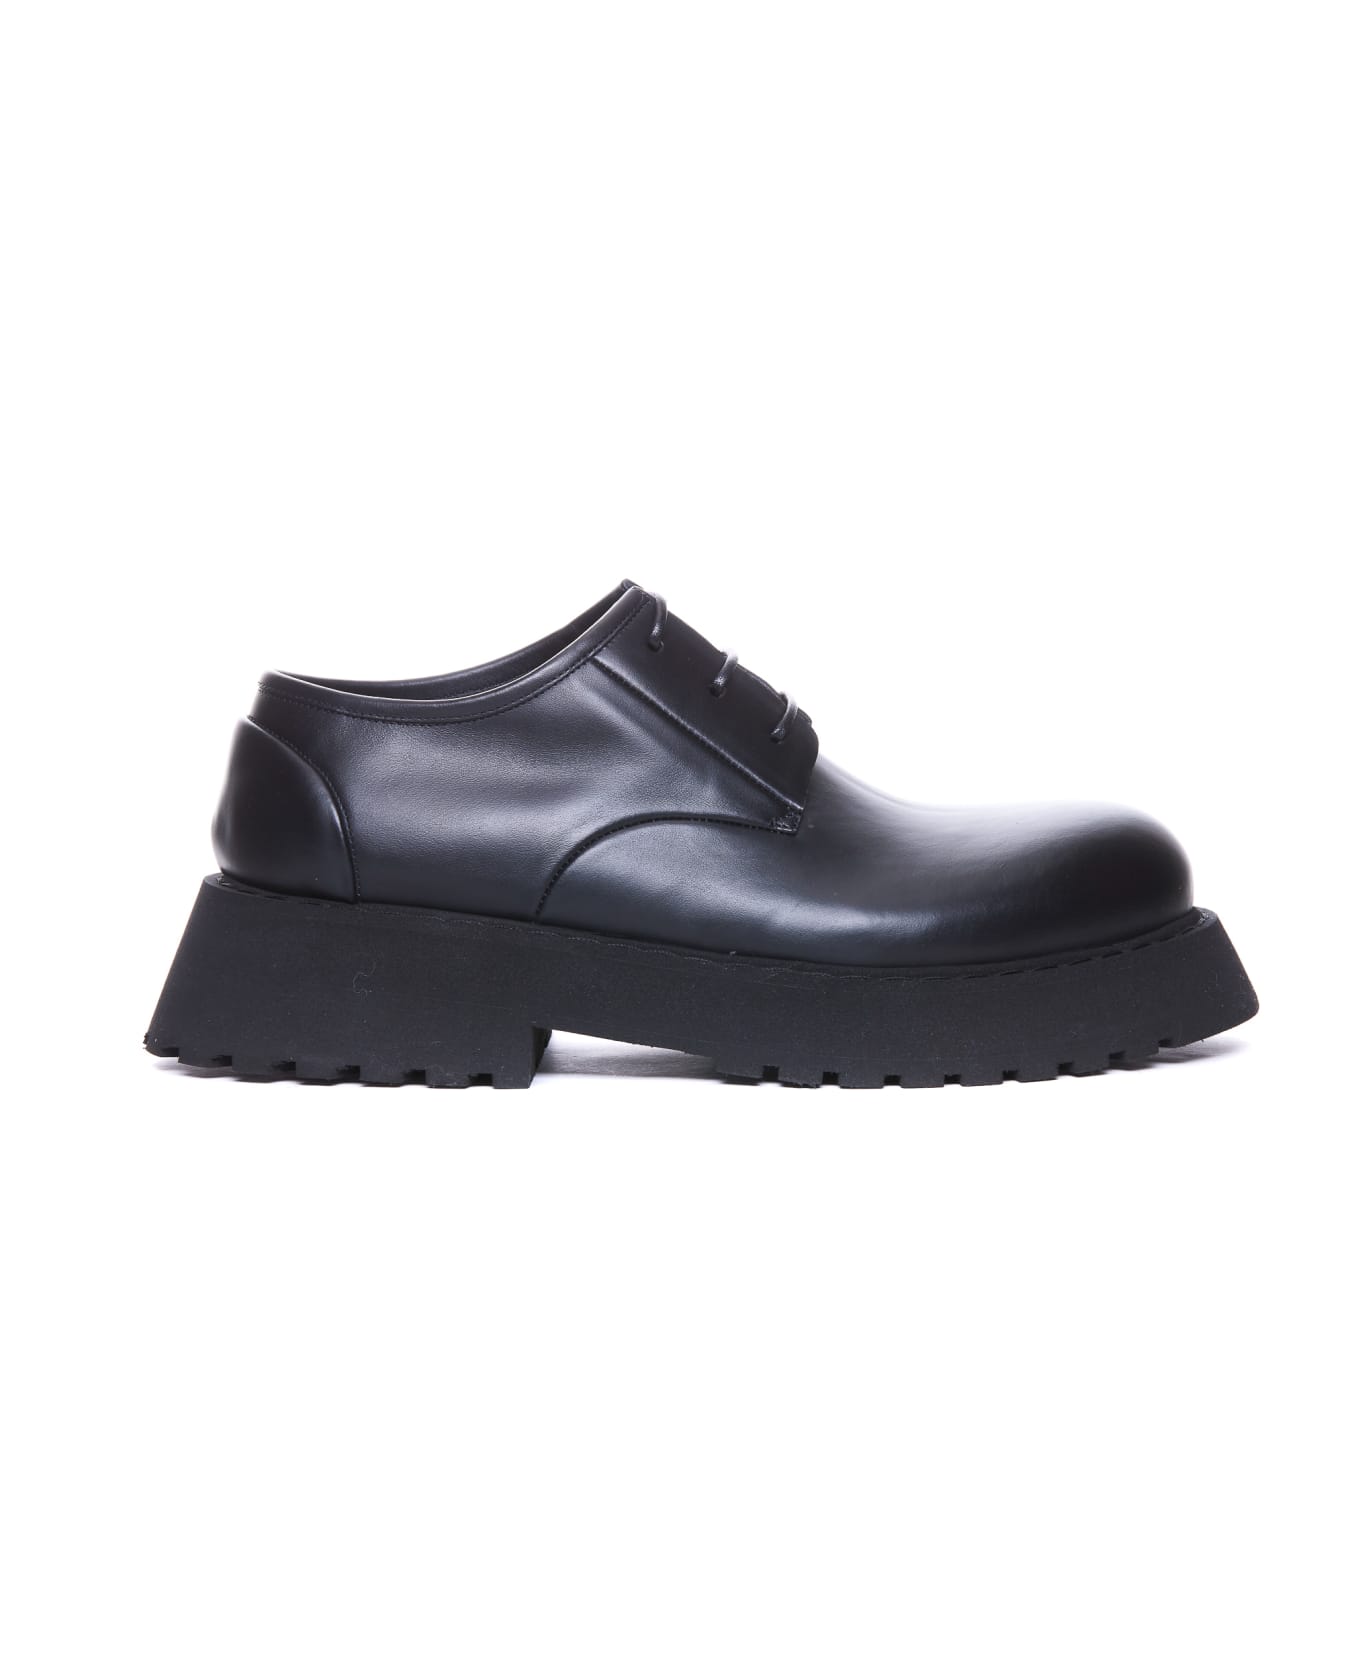 Marsell Micarro Derby Laced Up Shoes - Black